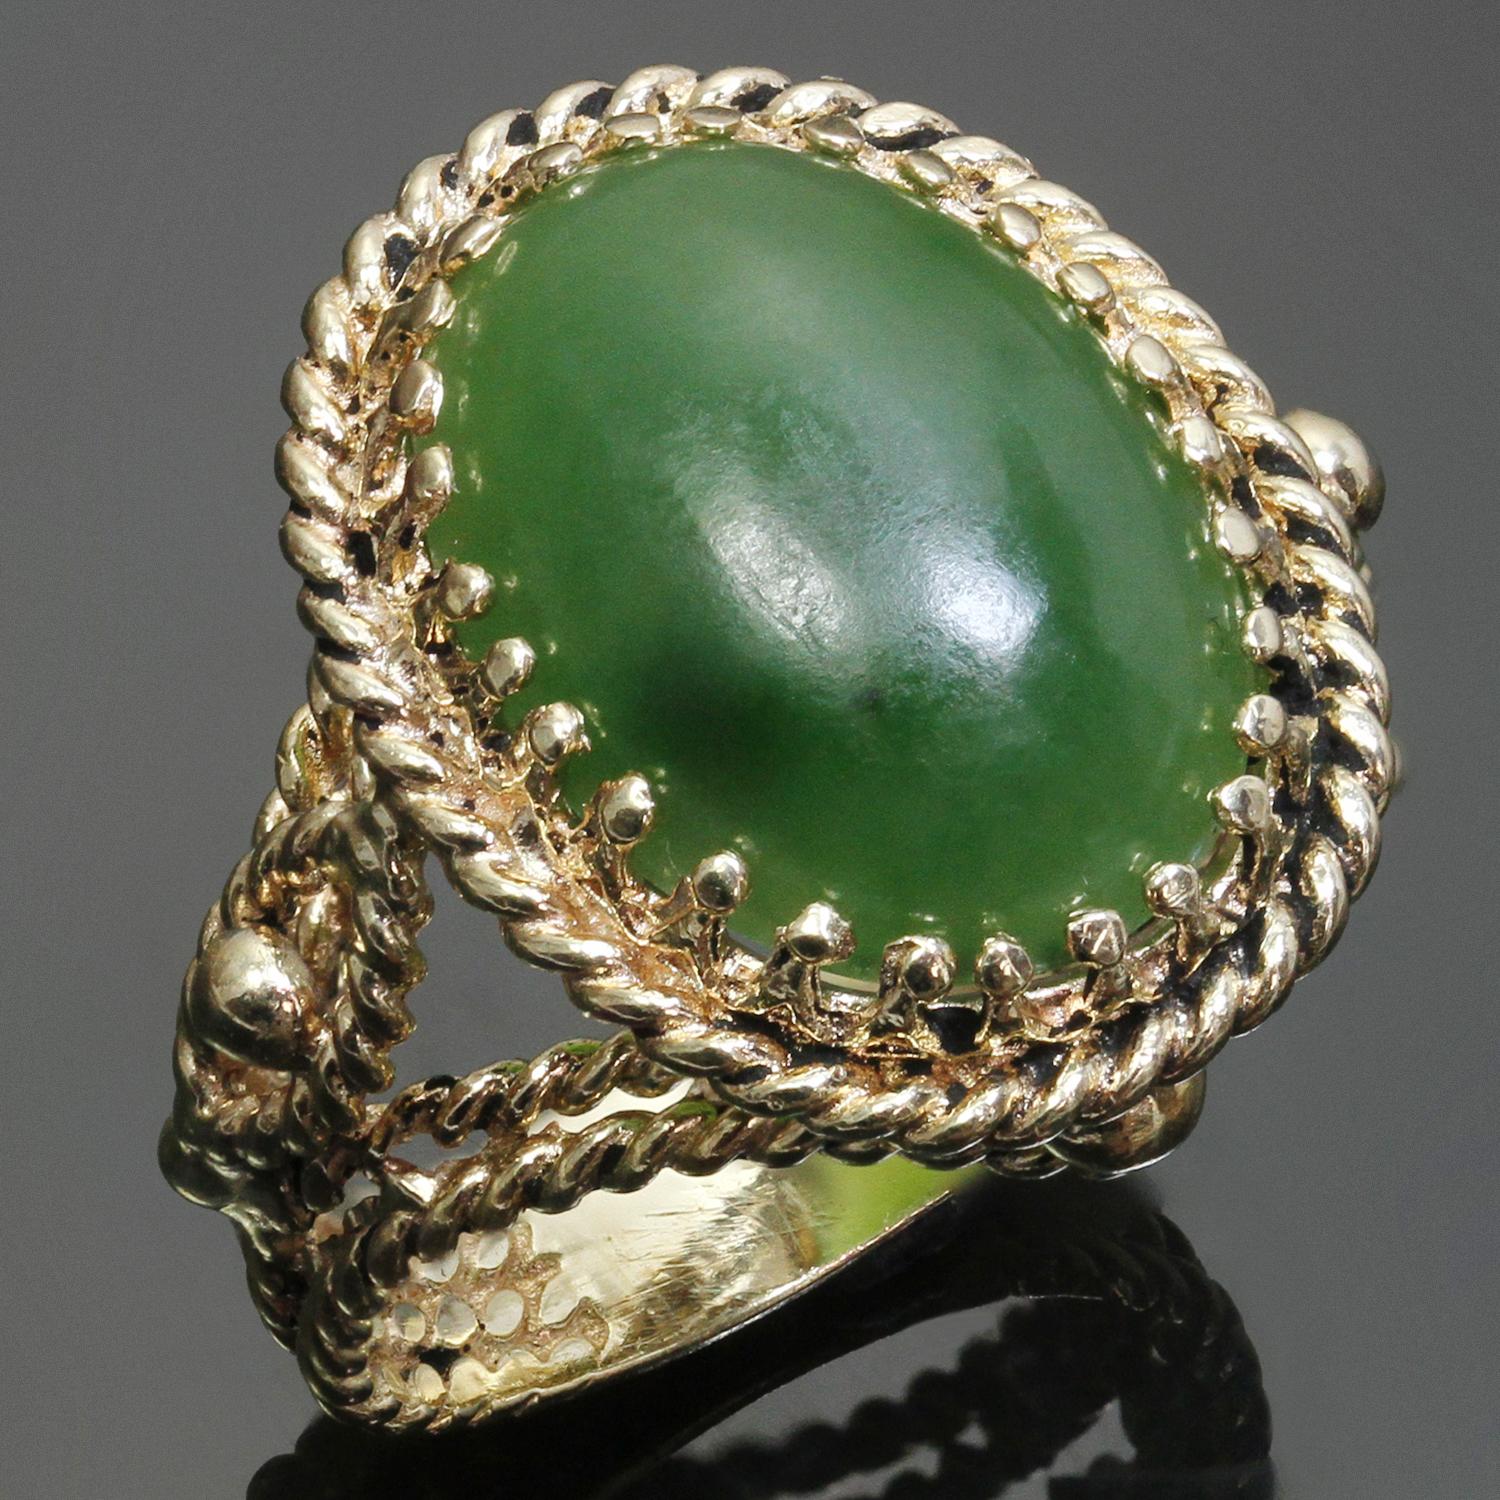 This classic retro estate cocktail ring features a braided design hand-crafted in 14k yellow gold and set with an oval green jade stone. Made in United States circa 1950s. Measurements: 0.86